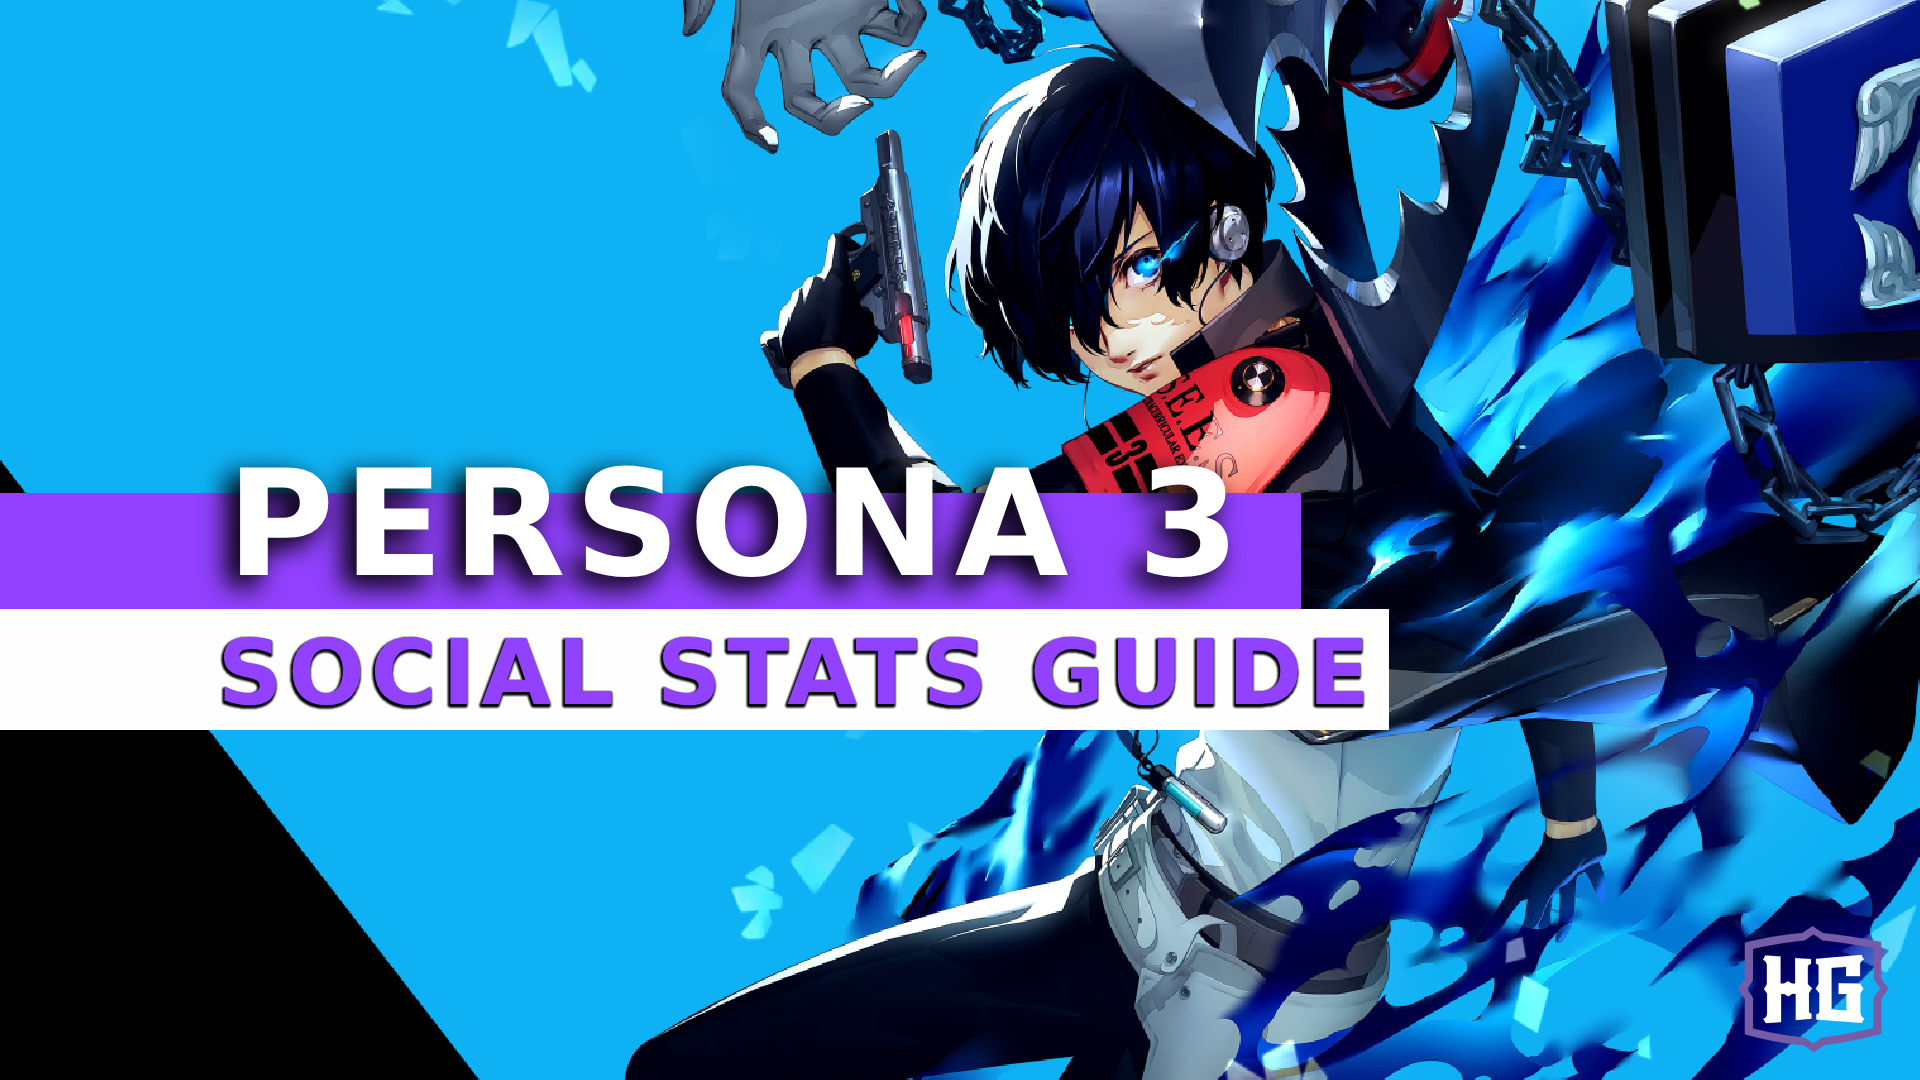 All Persona 3 Reload Social Link Answers and Unlock Requirements